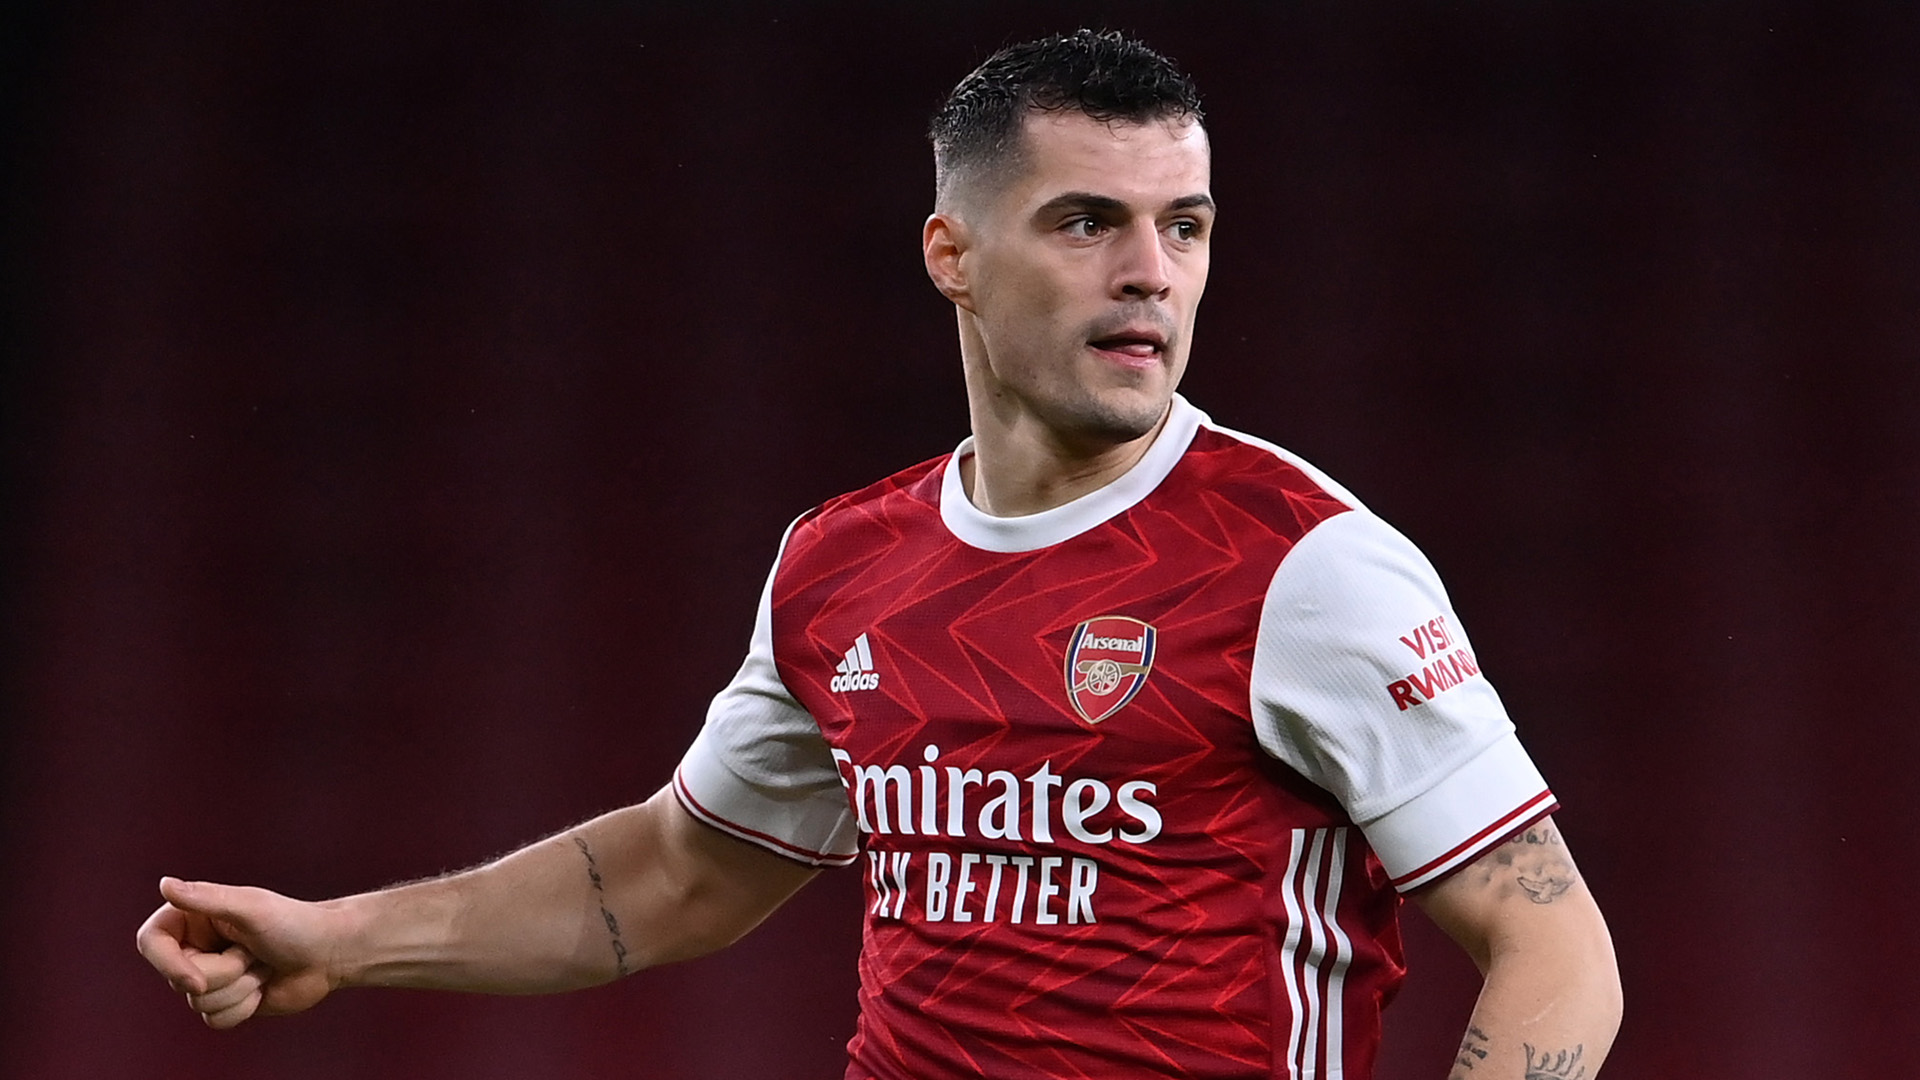 'Arsenal know what I want to do' - Xhaka drops exit hint amid links to Roma